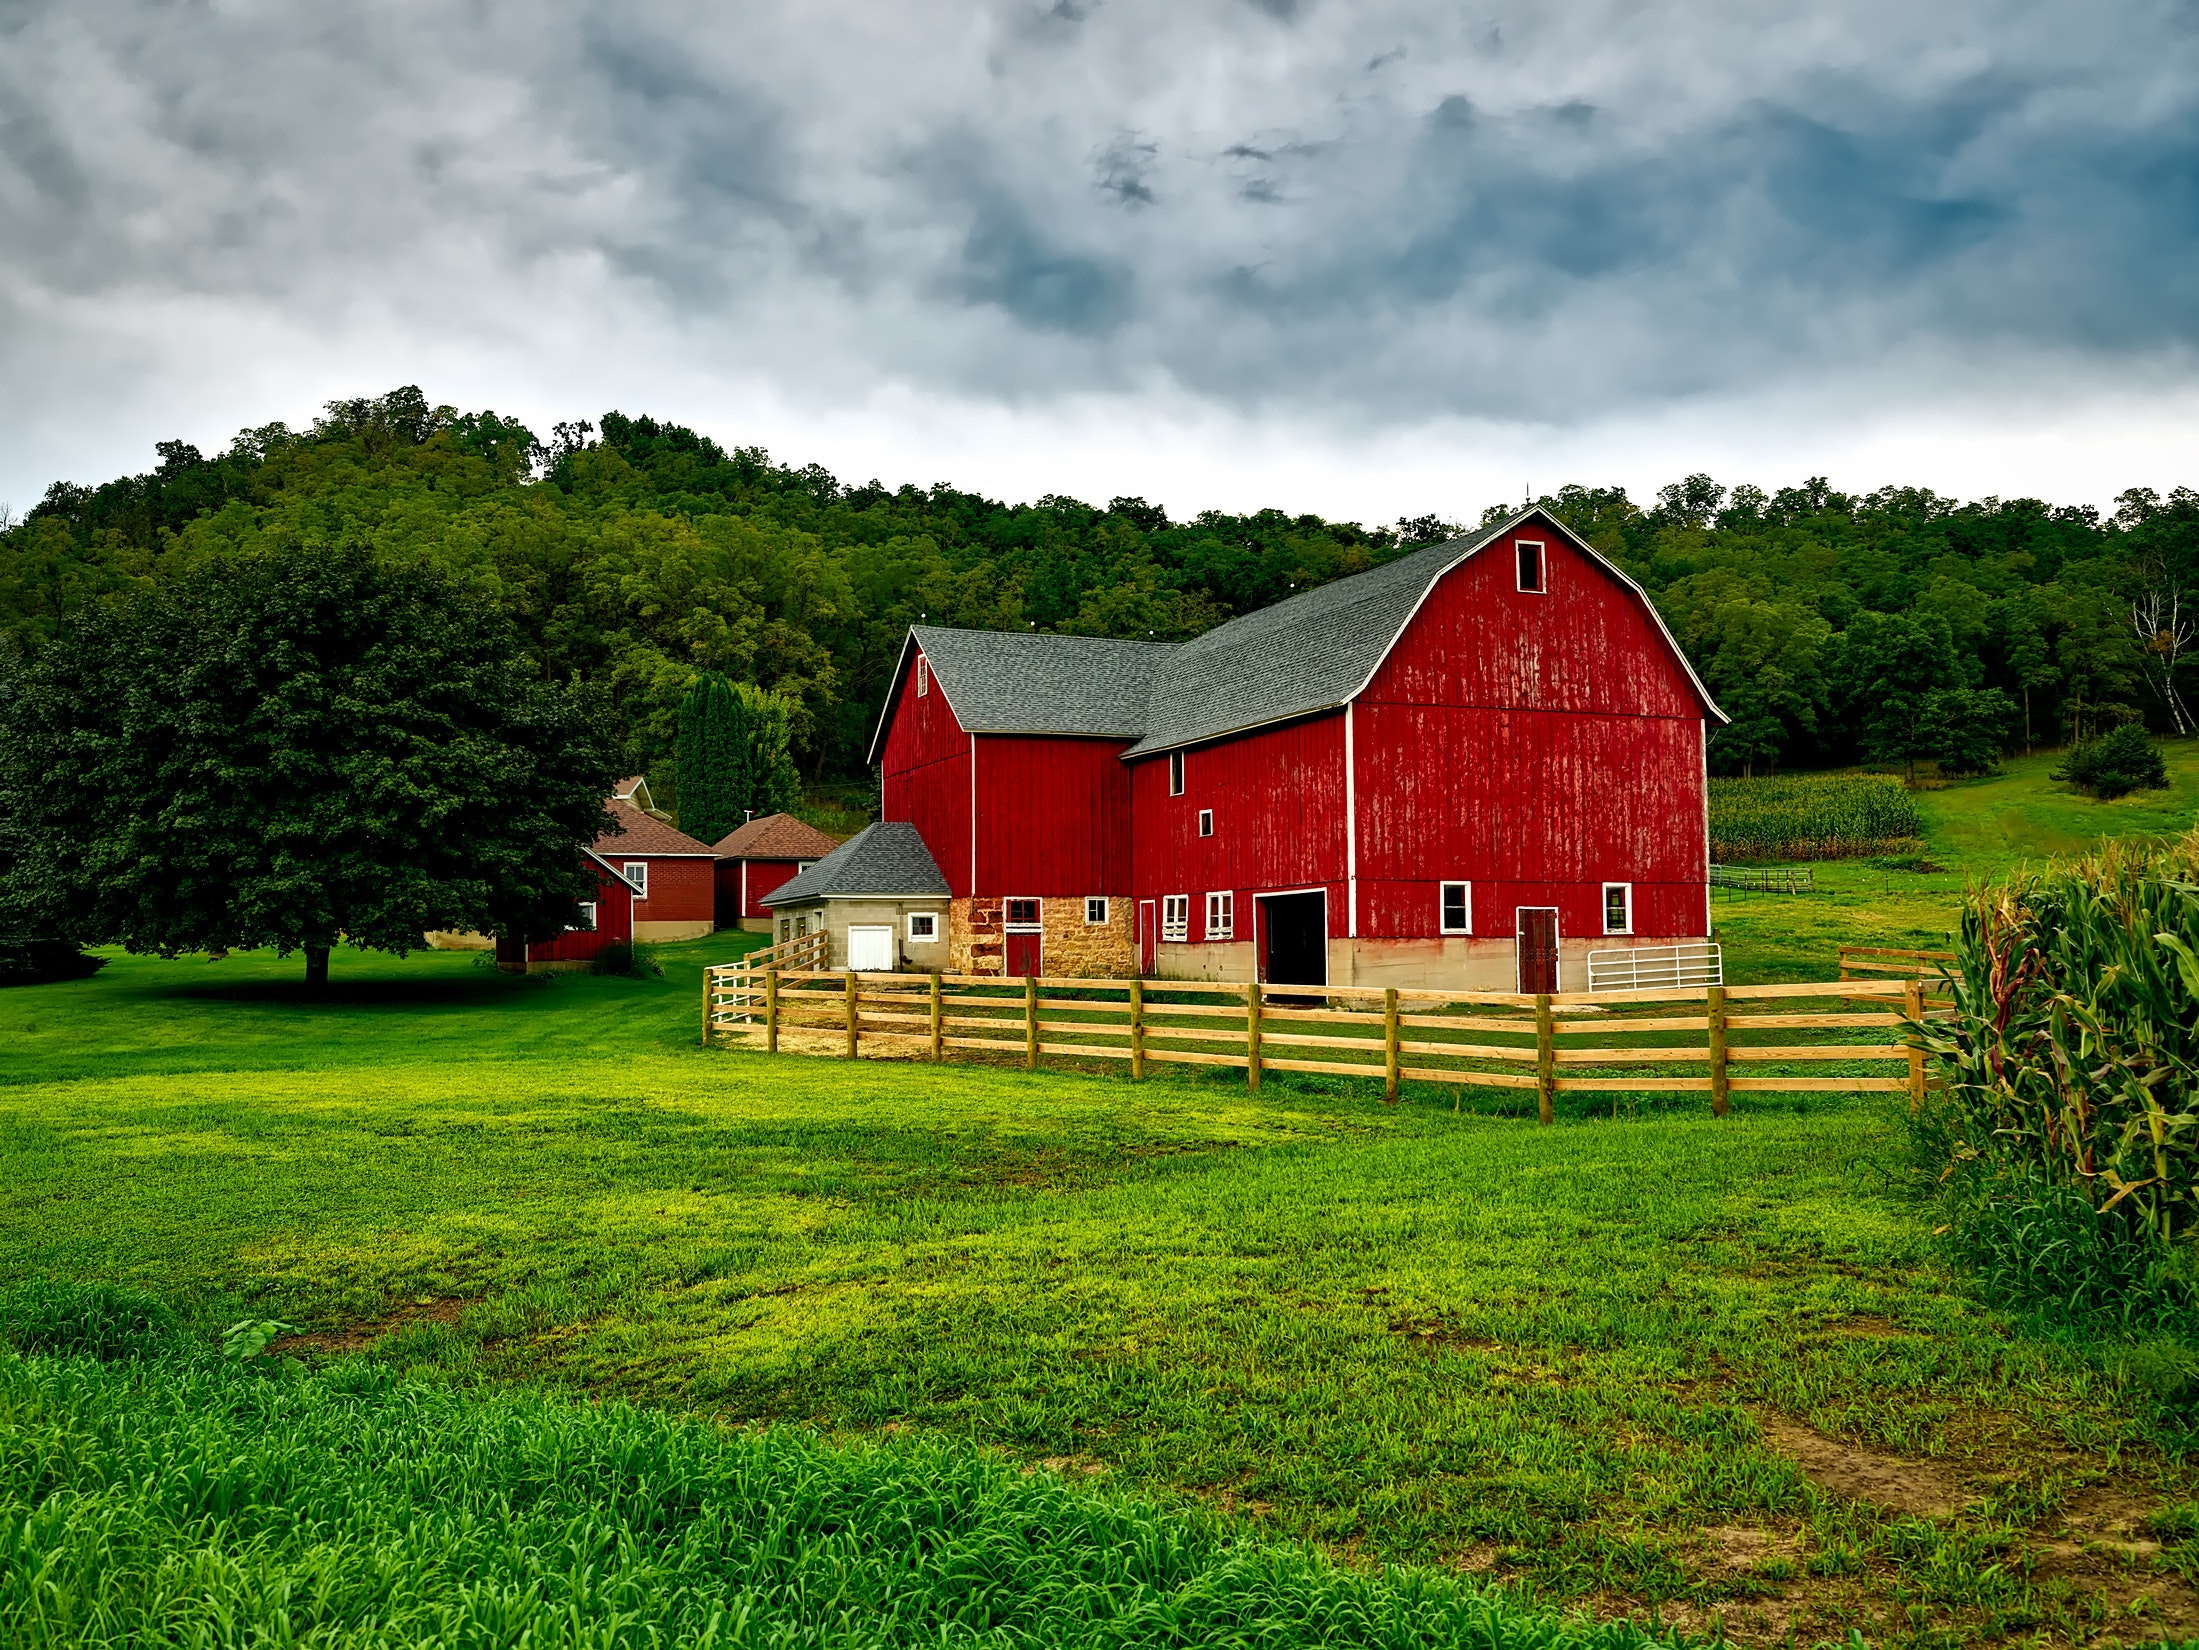 Barn photos download the best free barn stock photos hd images